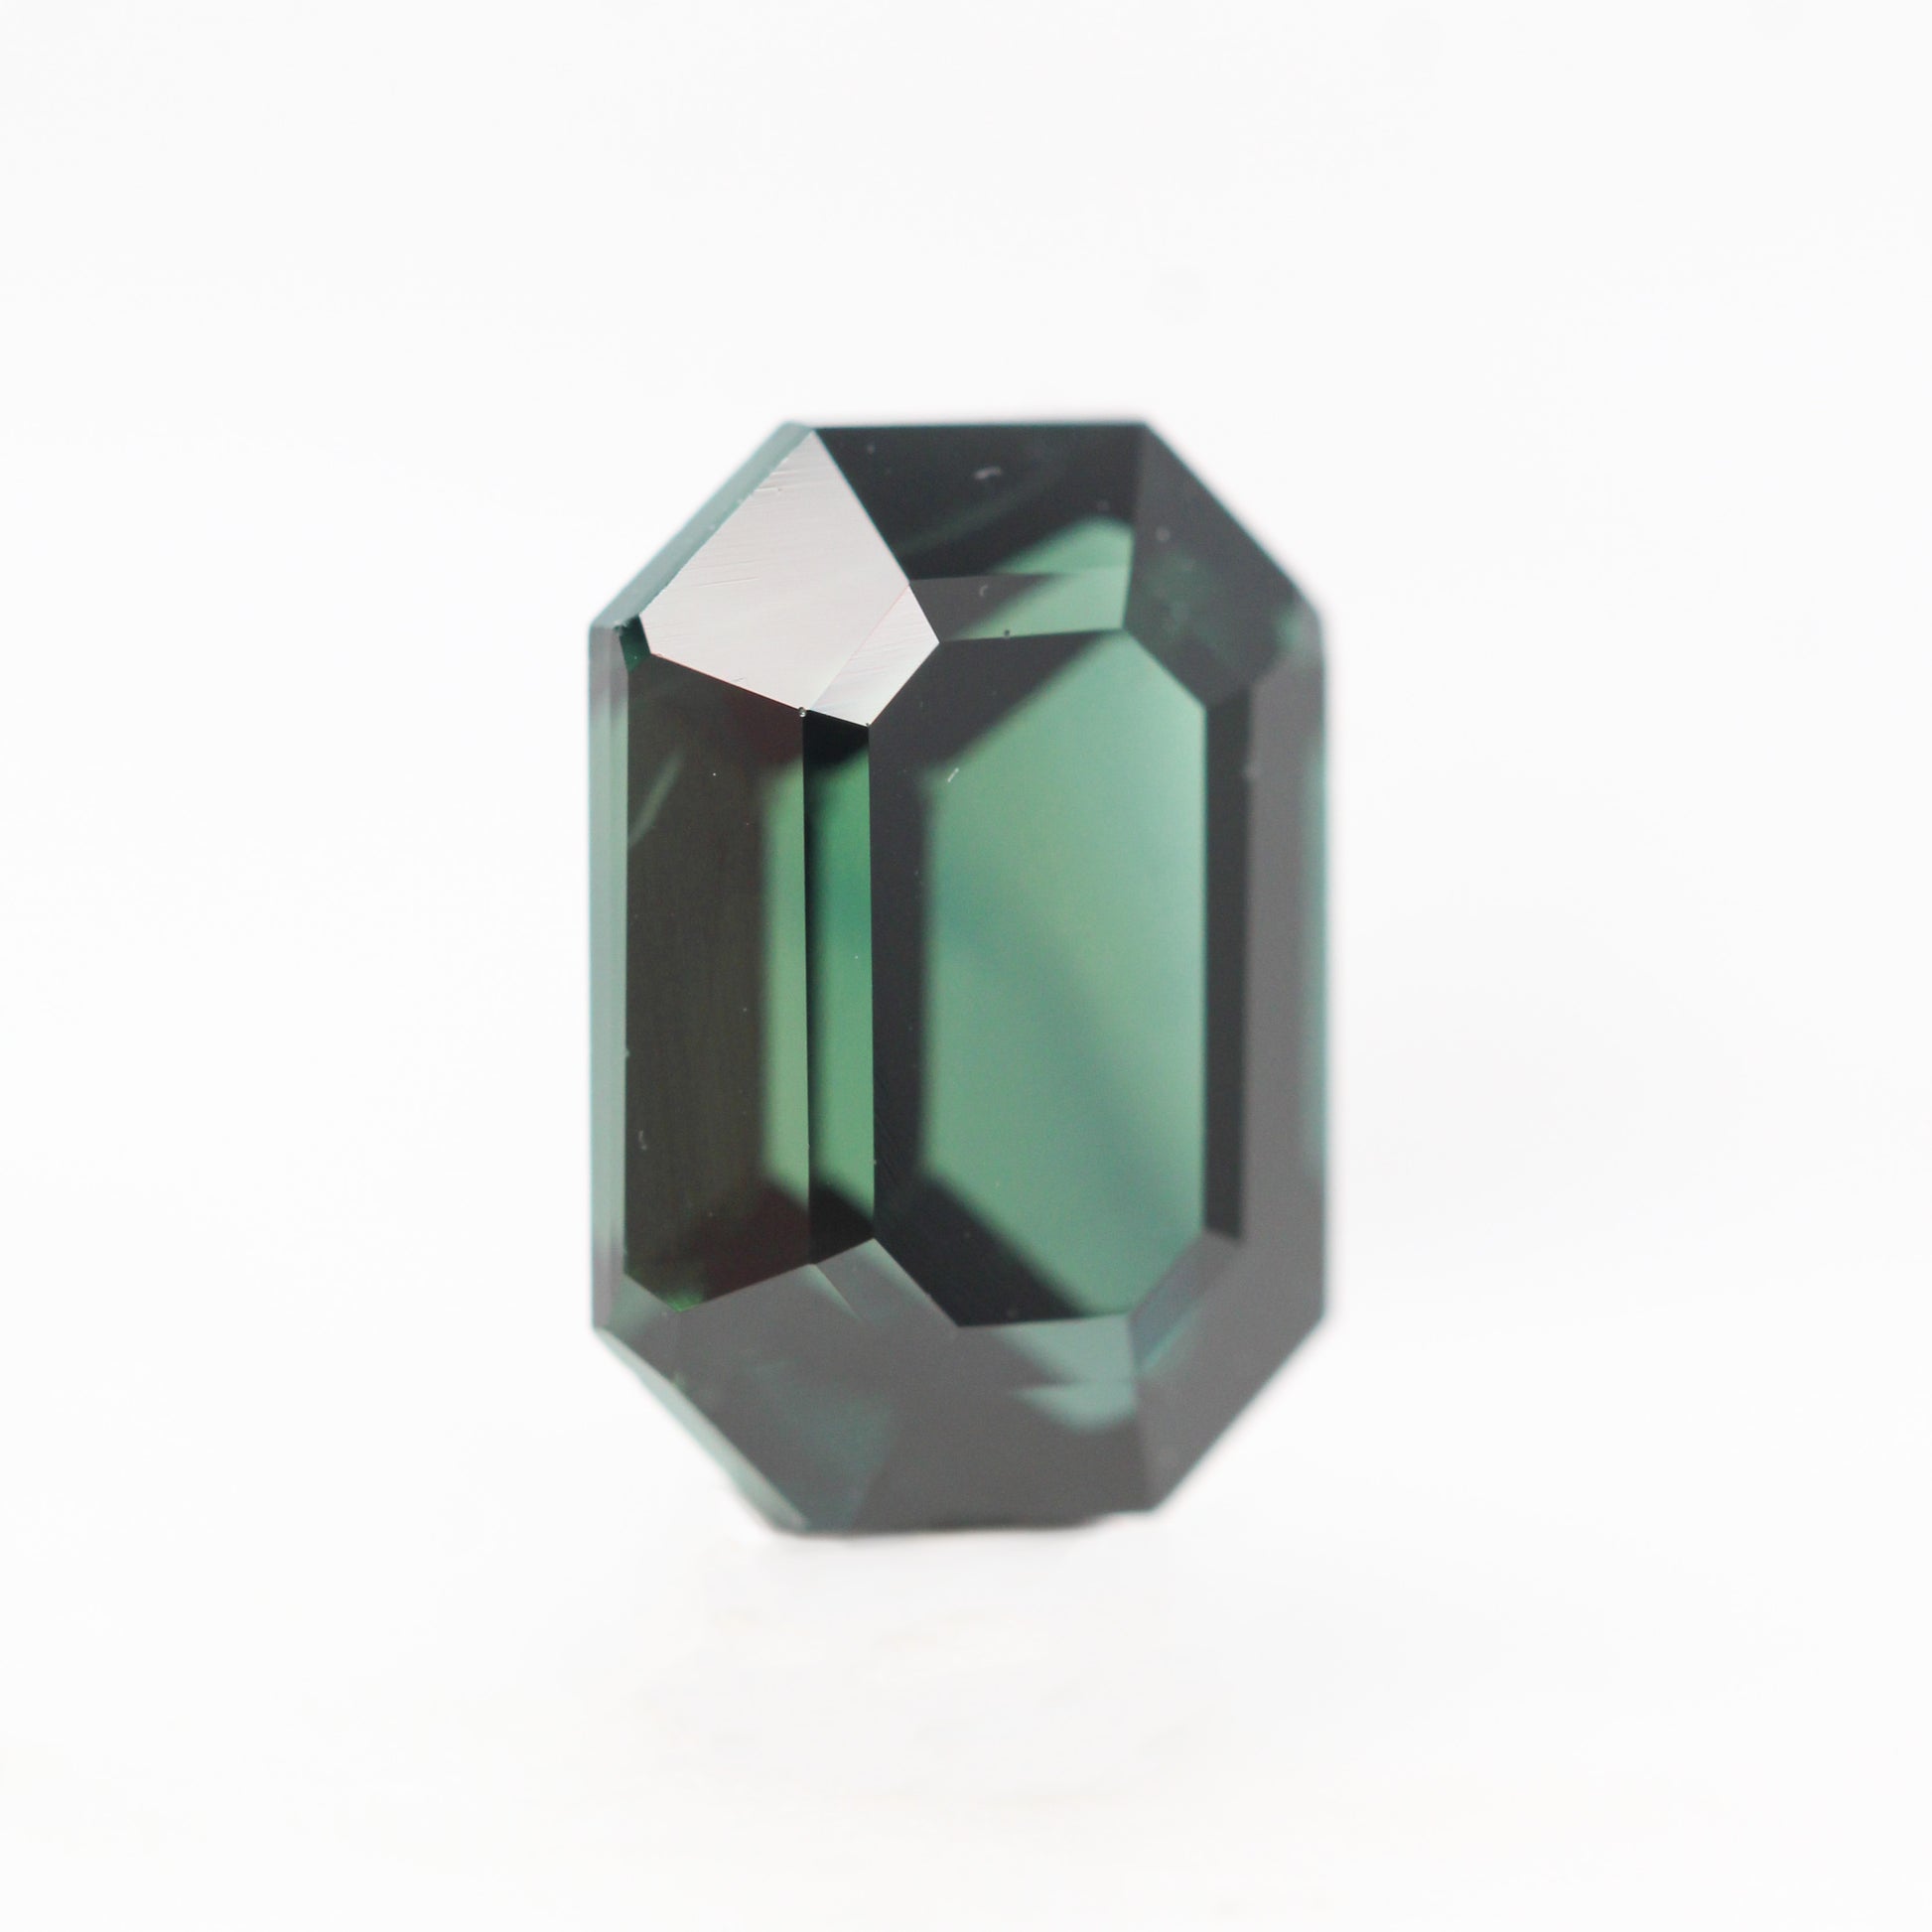 3.30 Carat Asscher Cut Green Sapphire for Custom Work - Inventory Code AGS330 - Midwinter Co. Alternative Bridal Rings and Modern Fine Jewelry